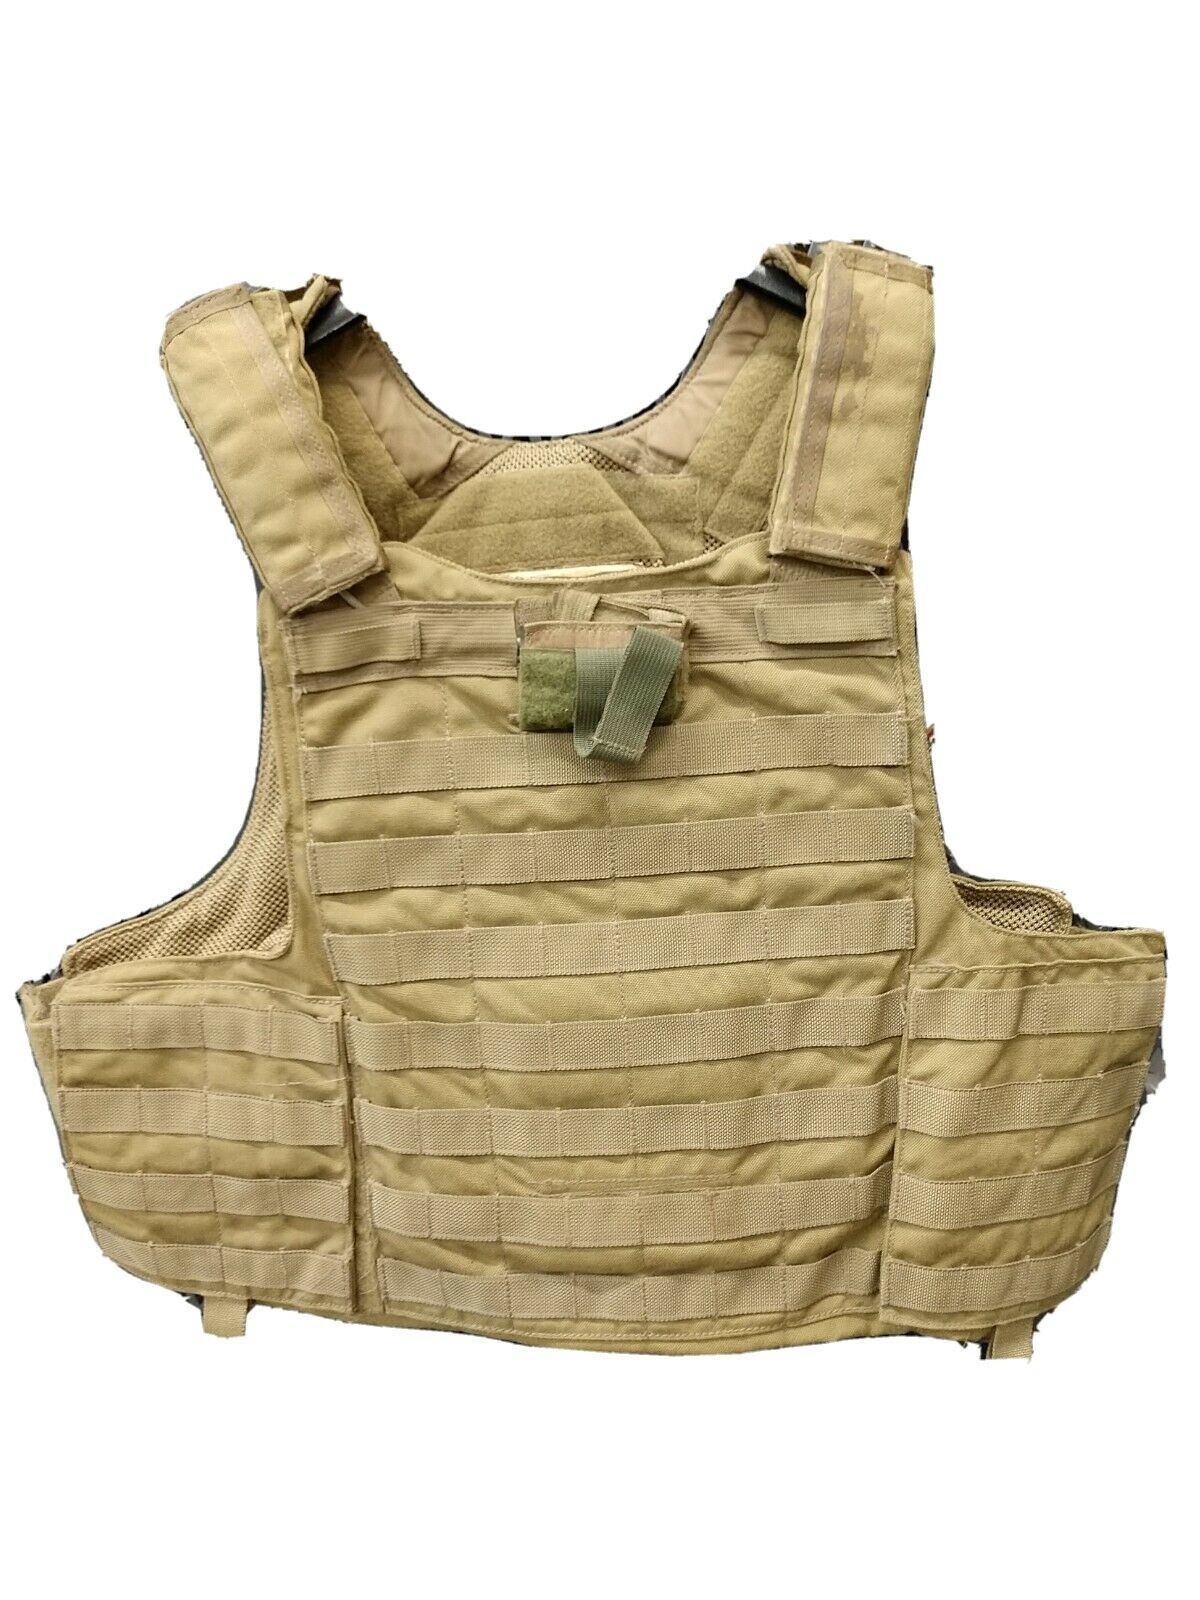 Show full-size image of Eagle Industries CIRAS Maritime USMC Plate Carrier ...